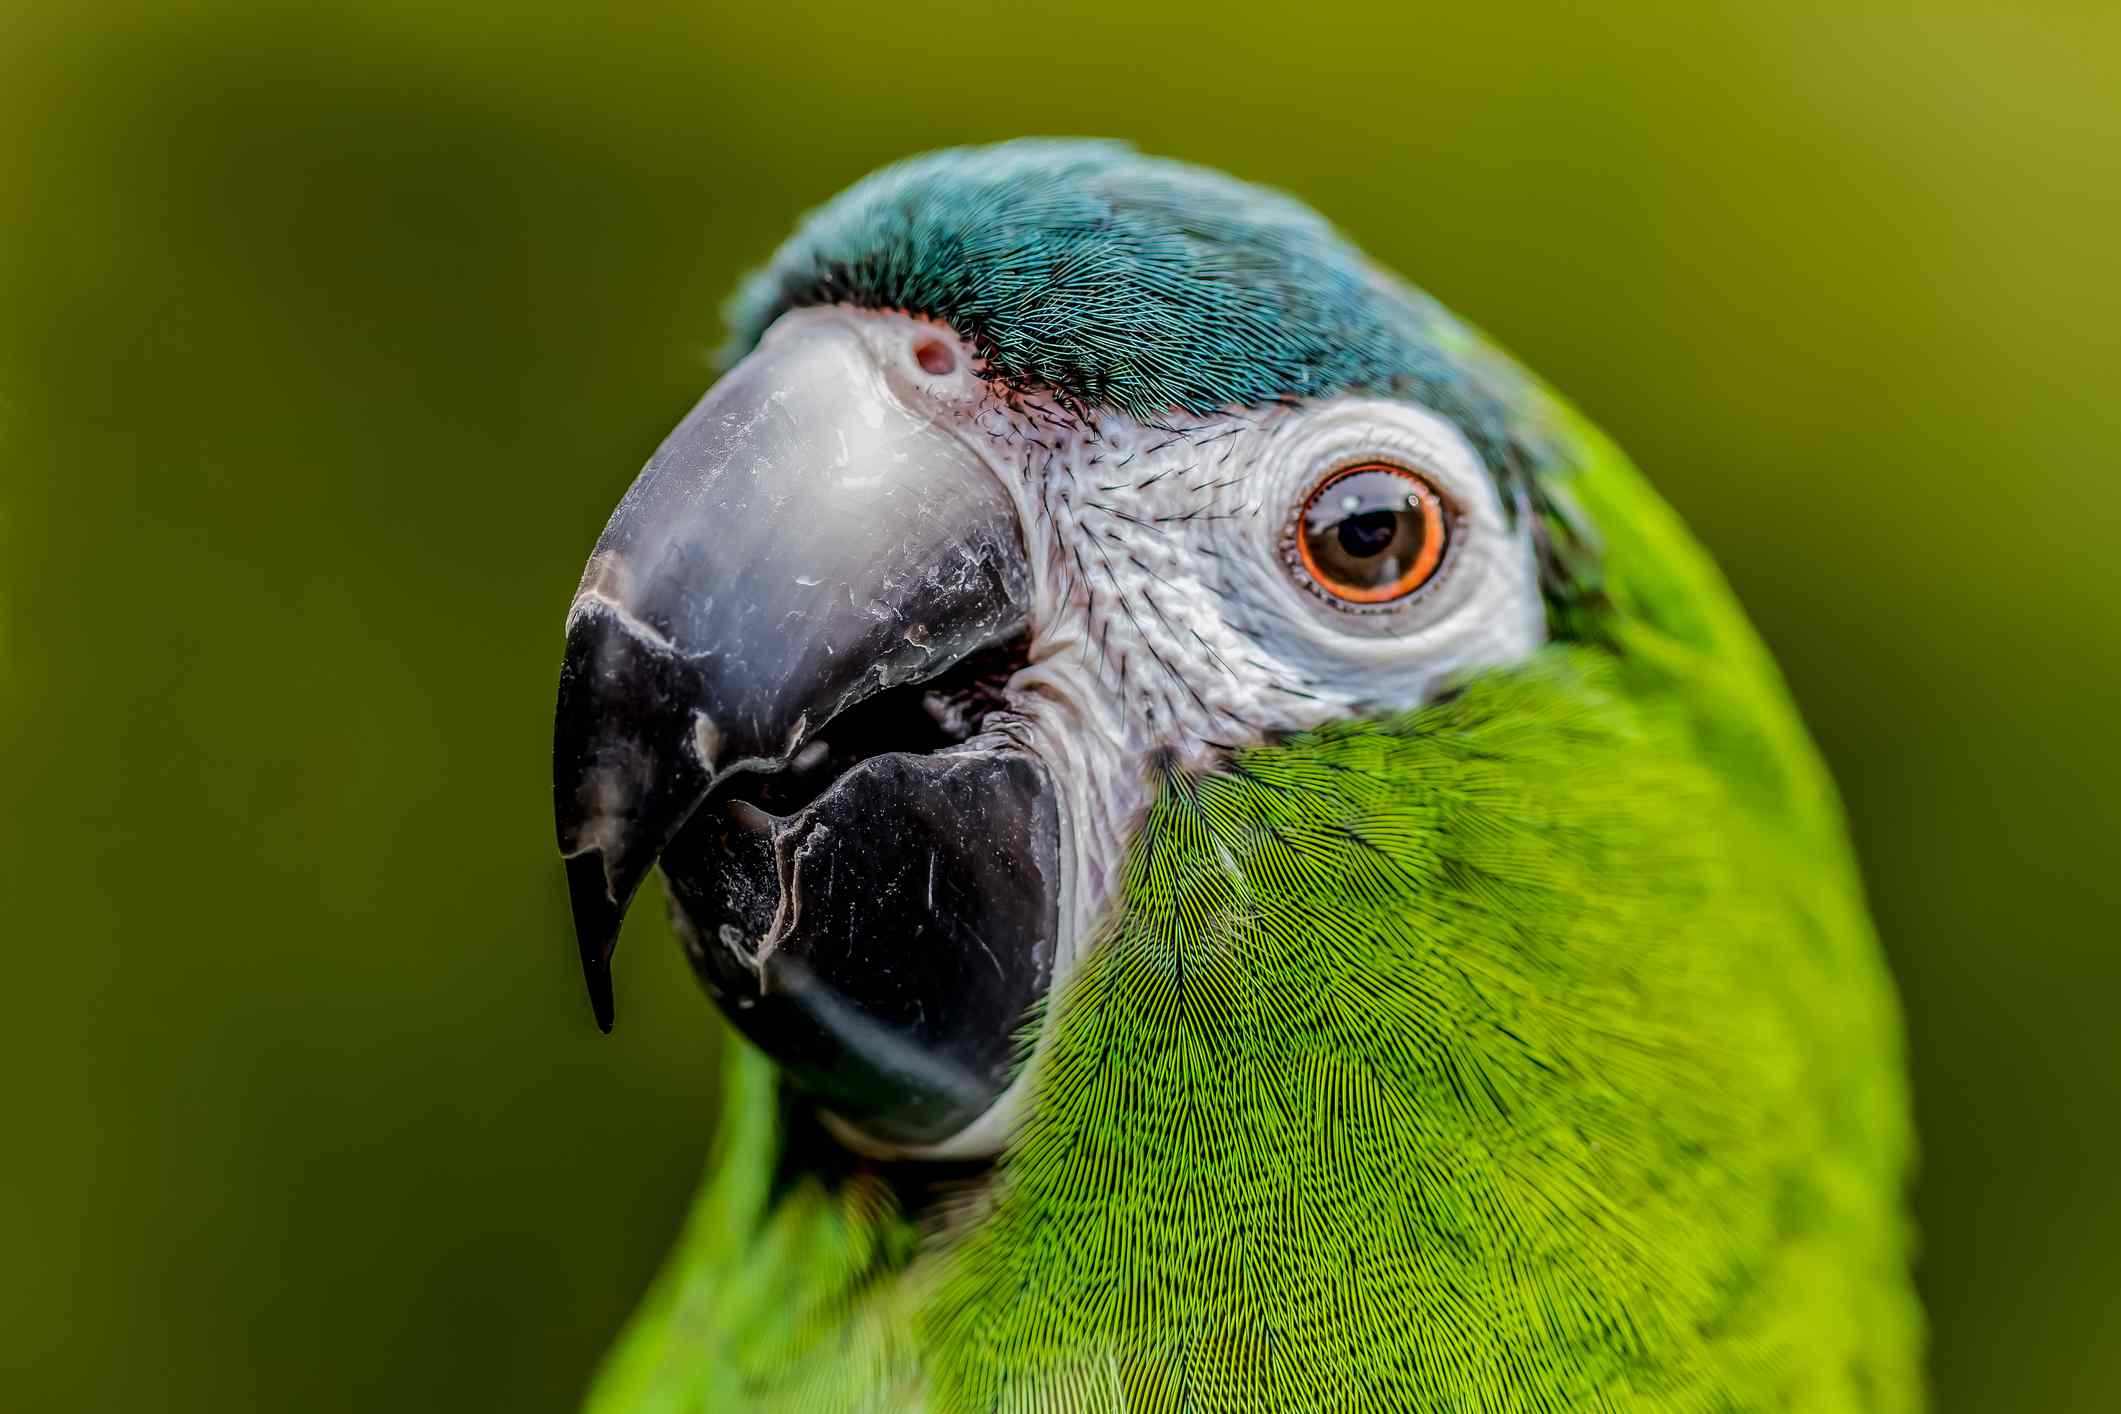 Hahn's macaw face